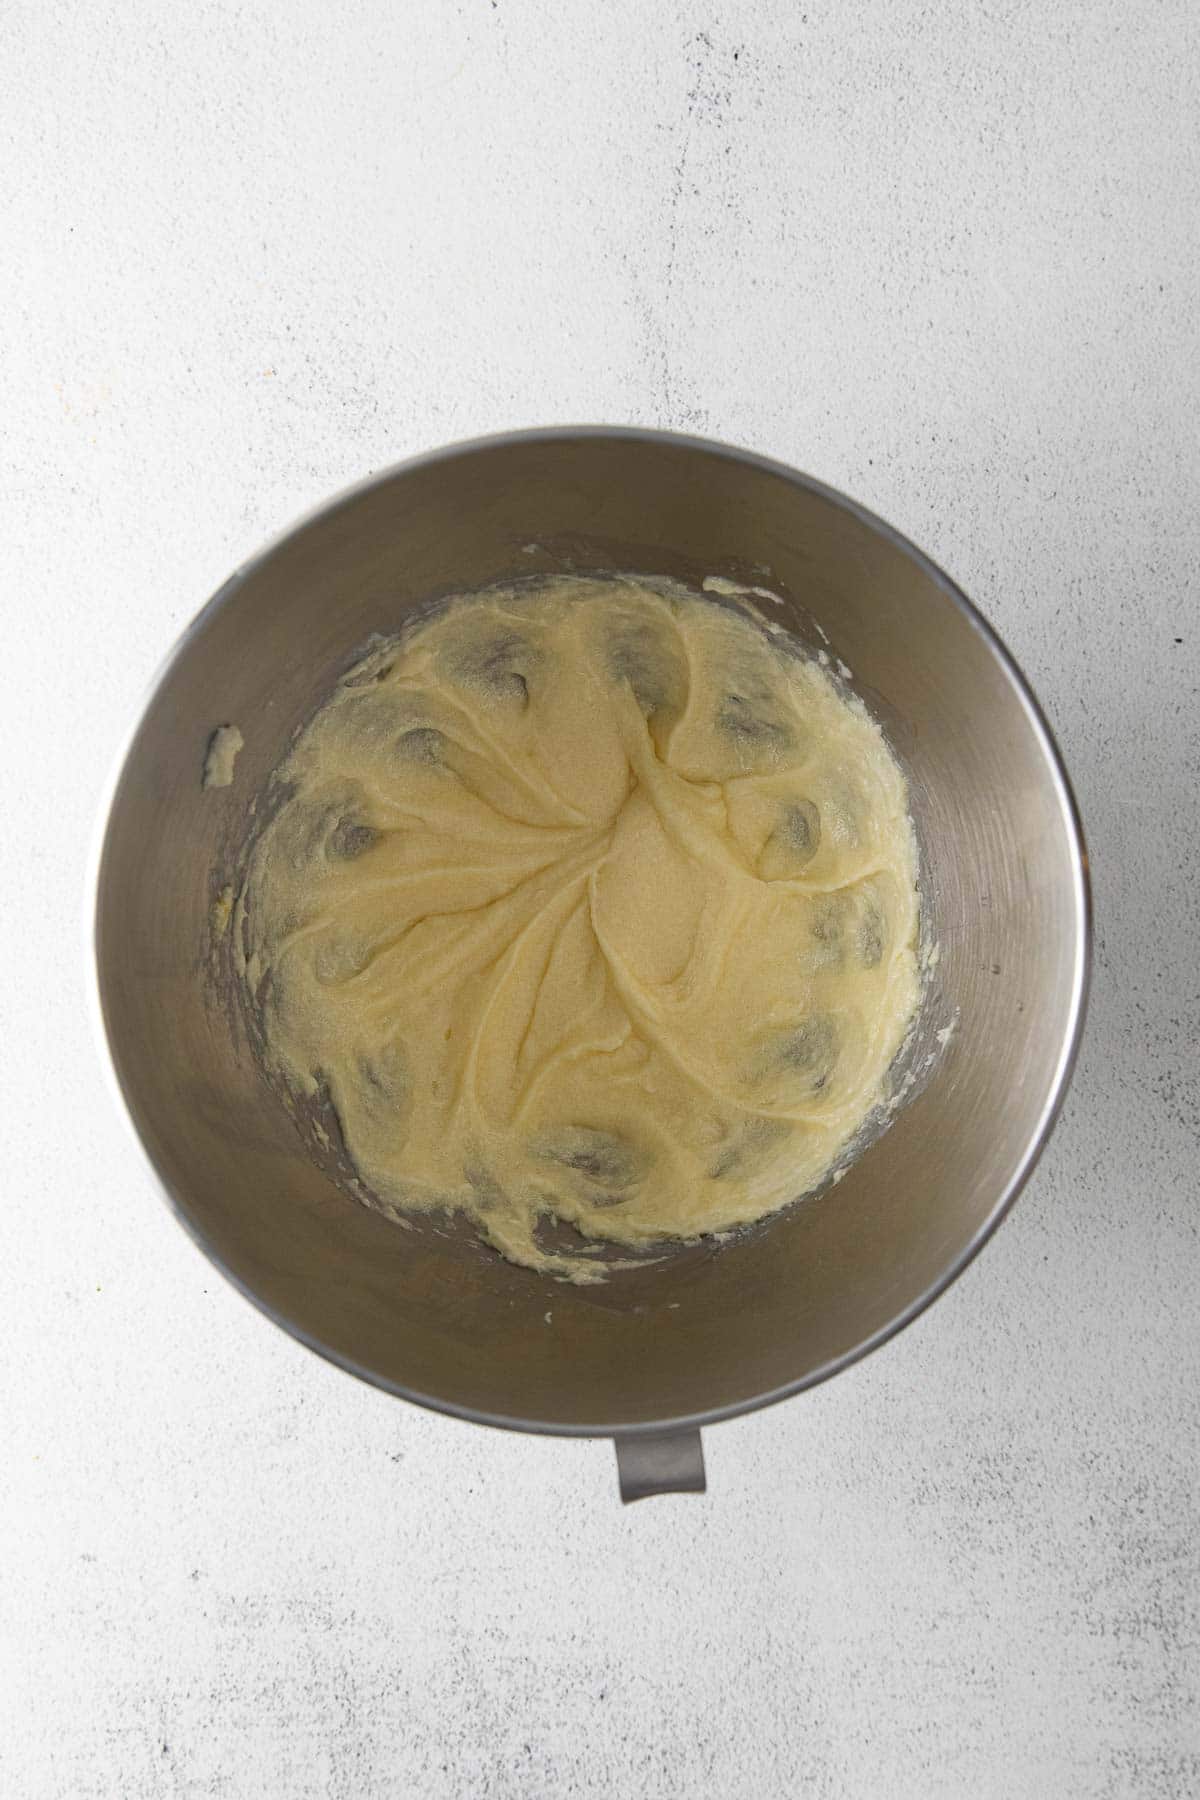 creamed butter in a stainless steel mixing bowl